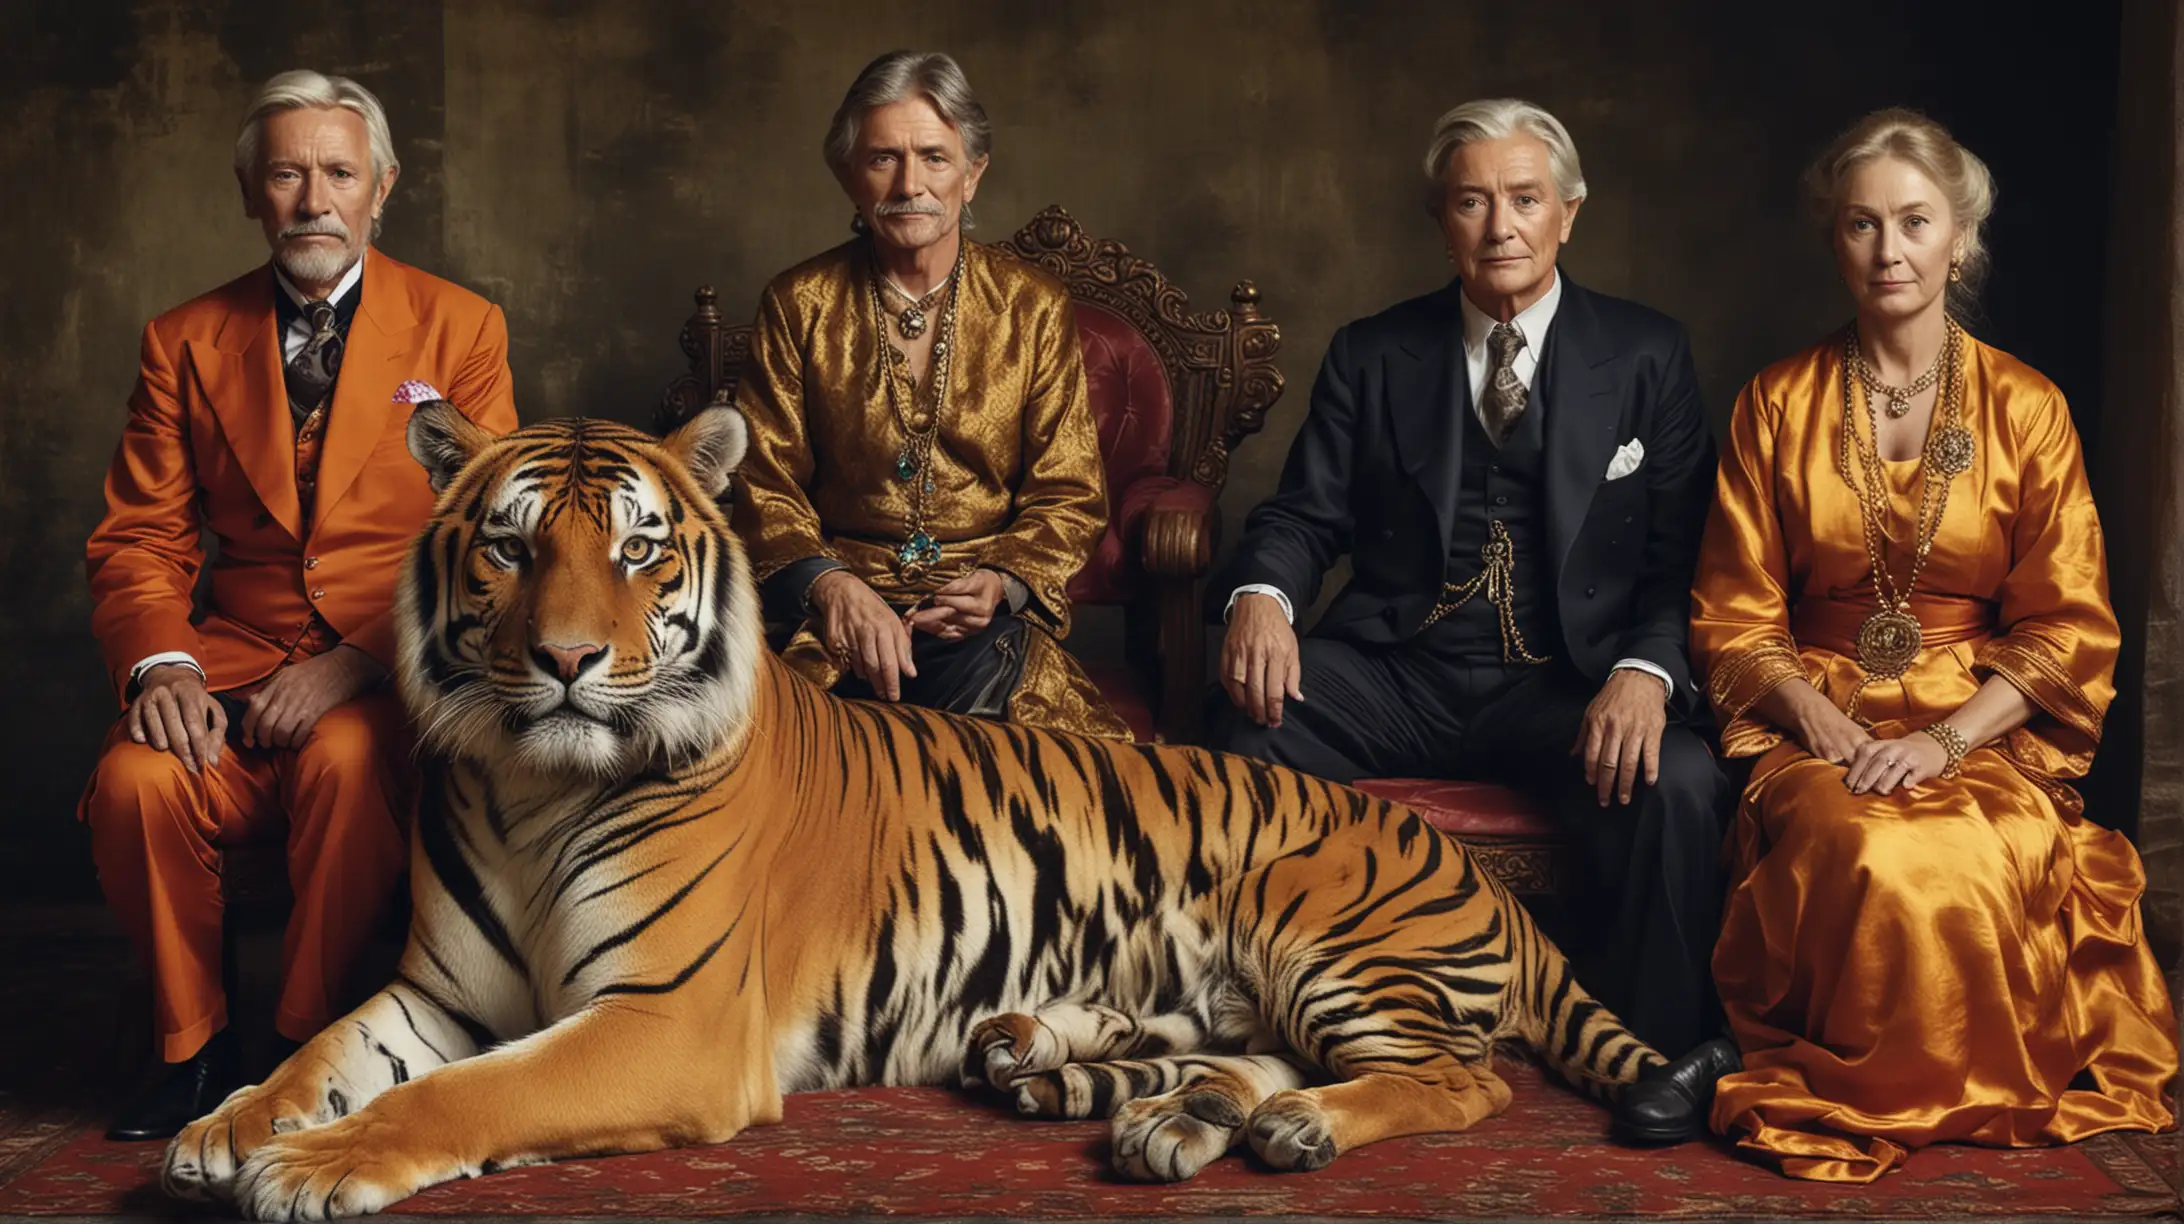 Old Rich Family sitting with tiger